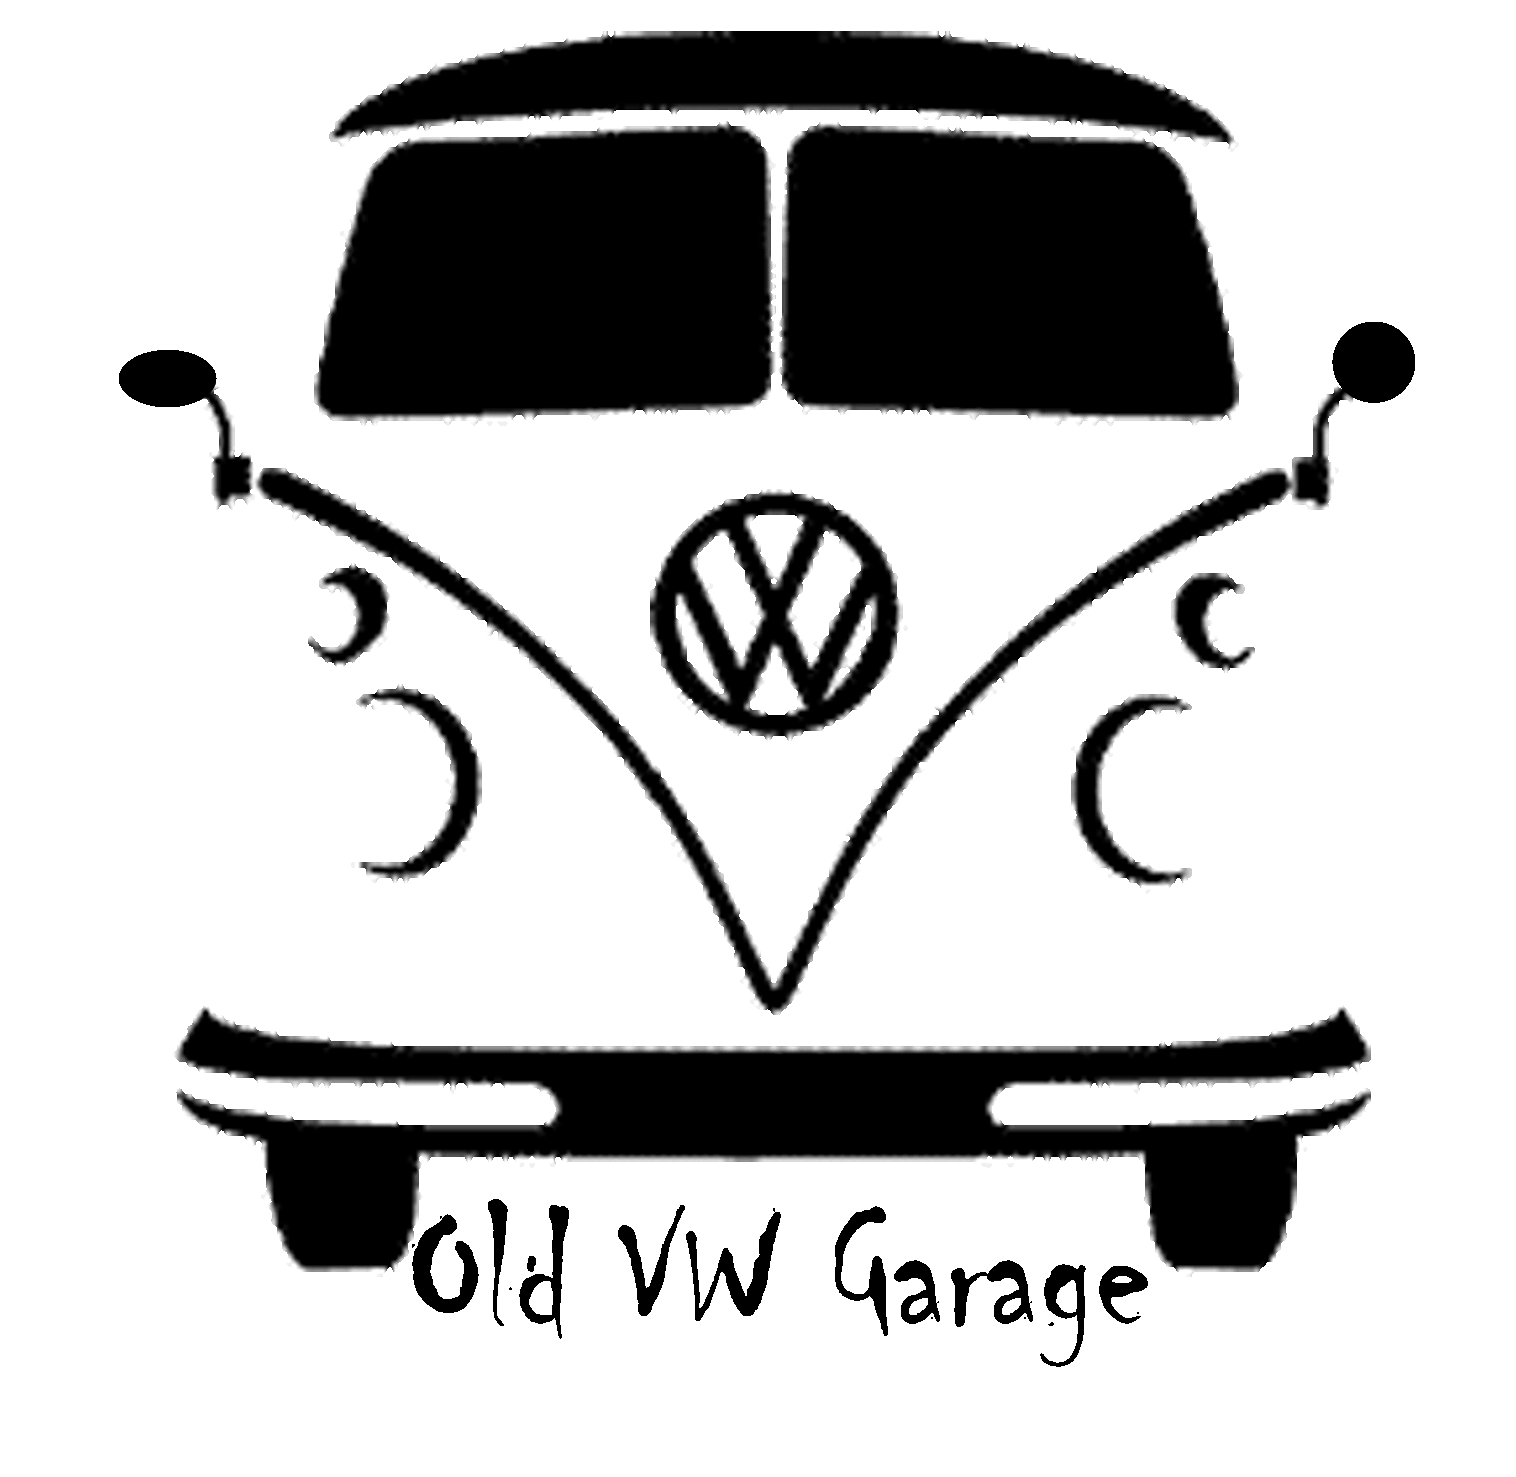 Vintage Volkswagen Logo - Pin by Ken Rybczyk on Products I Love | Pinterest | Vw bus, Cars and ...